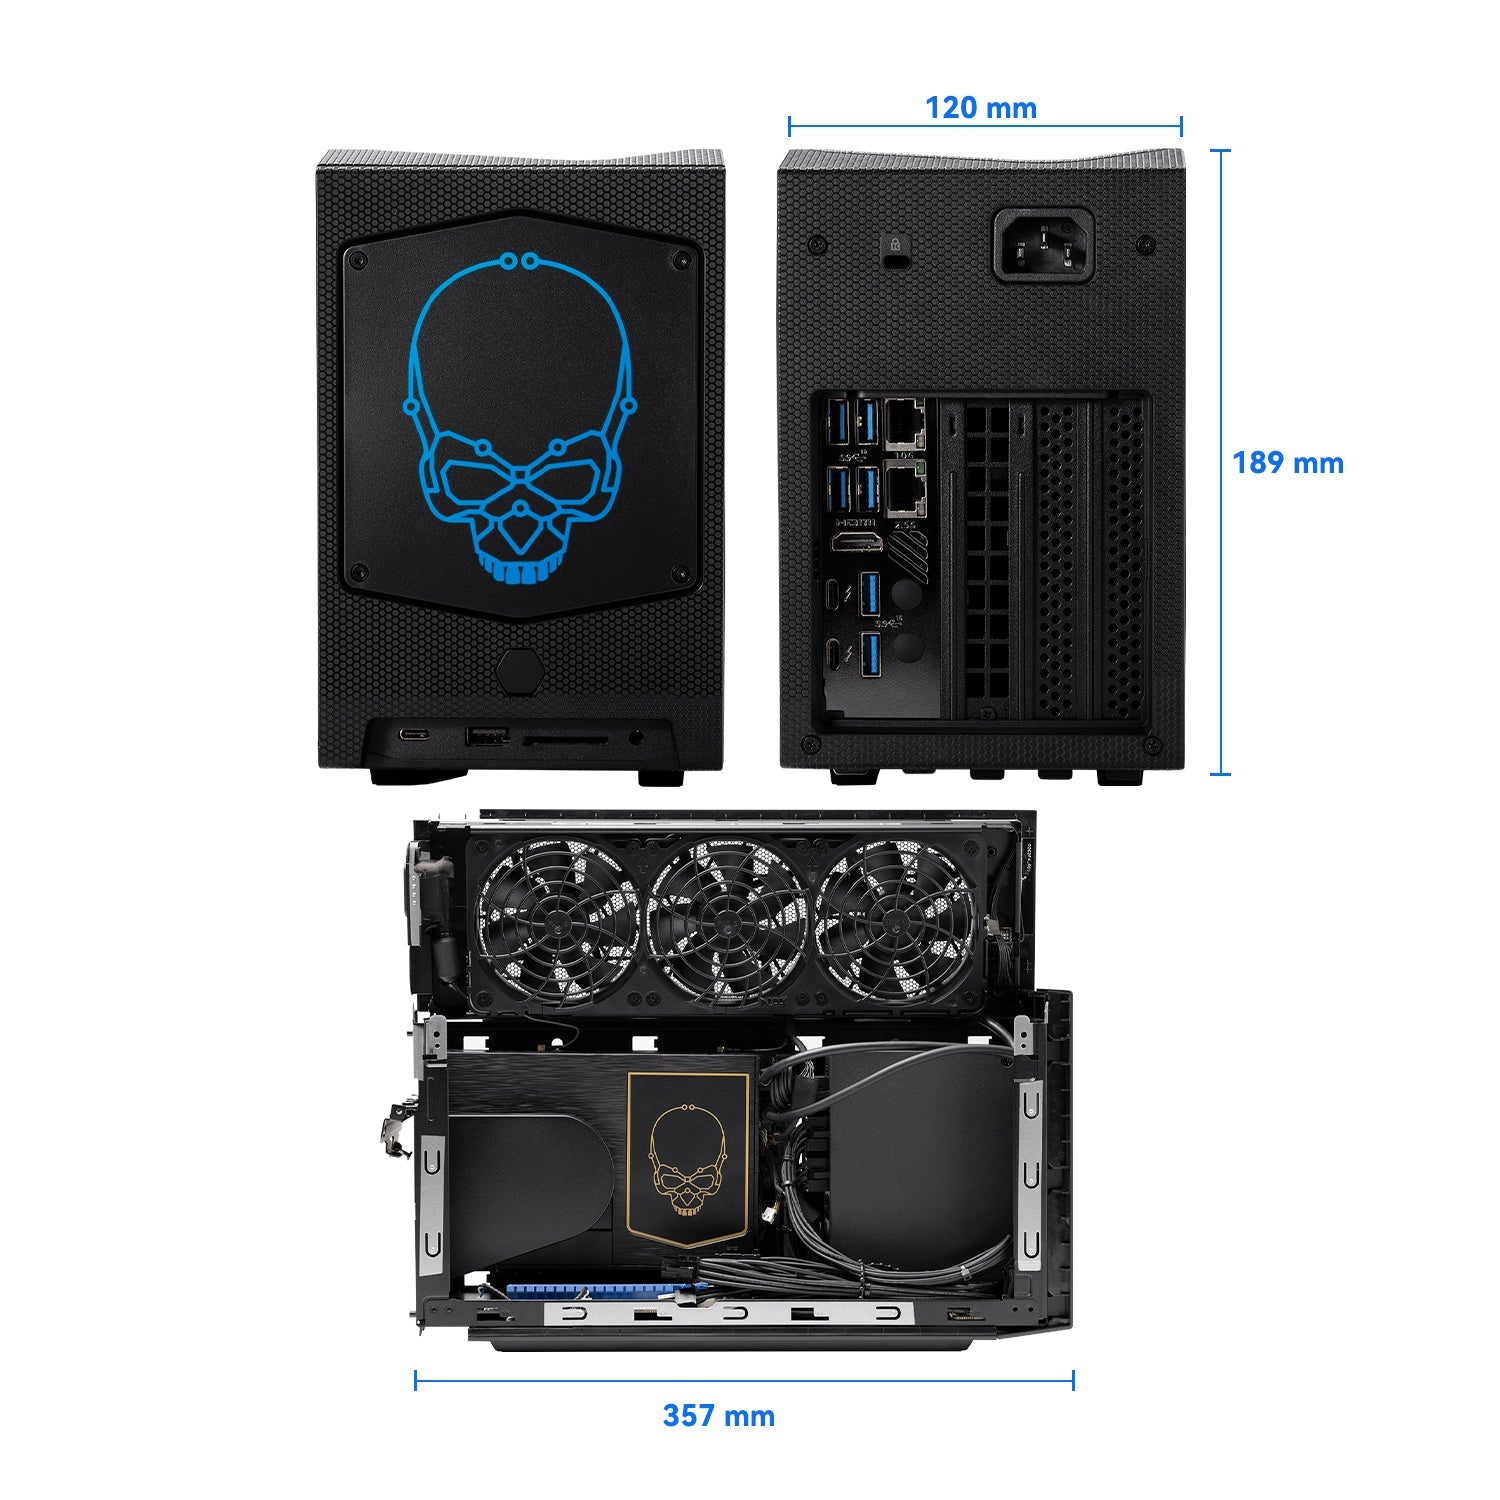 Length, width, and height dimensions of Intel NUC 12 Extreme.